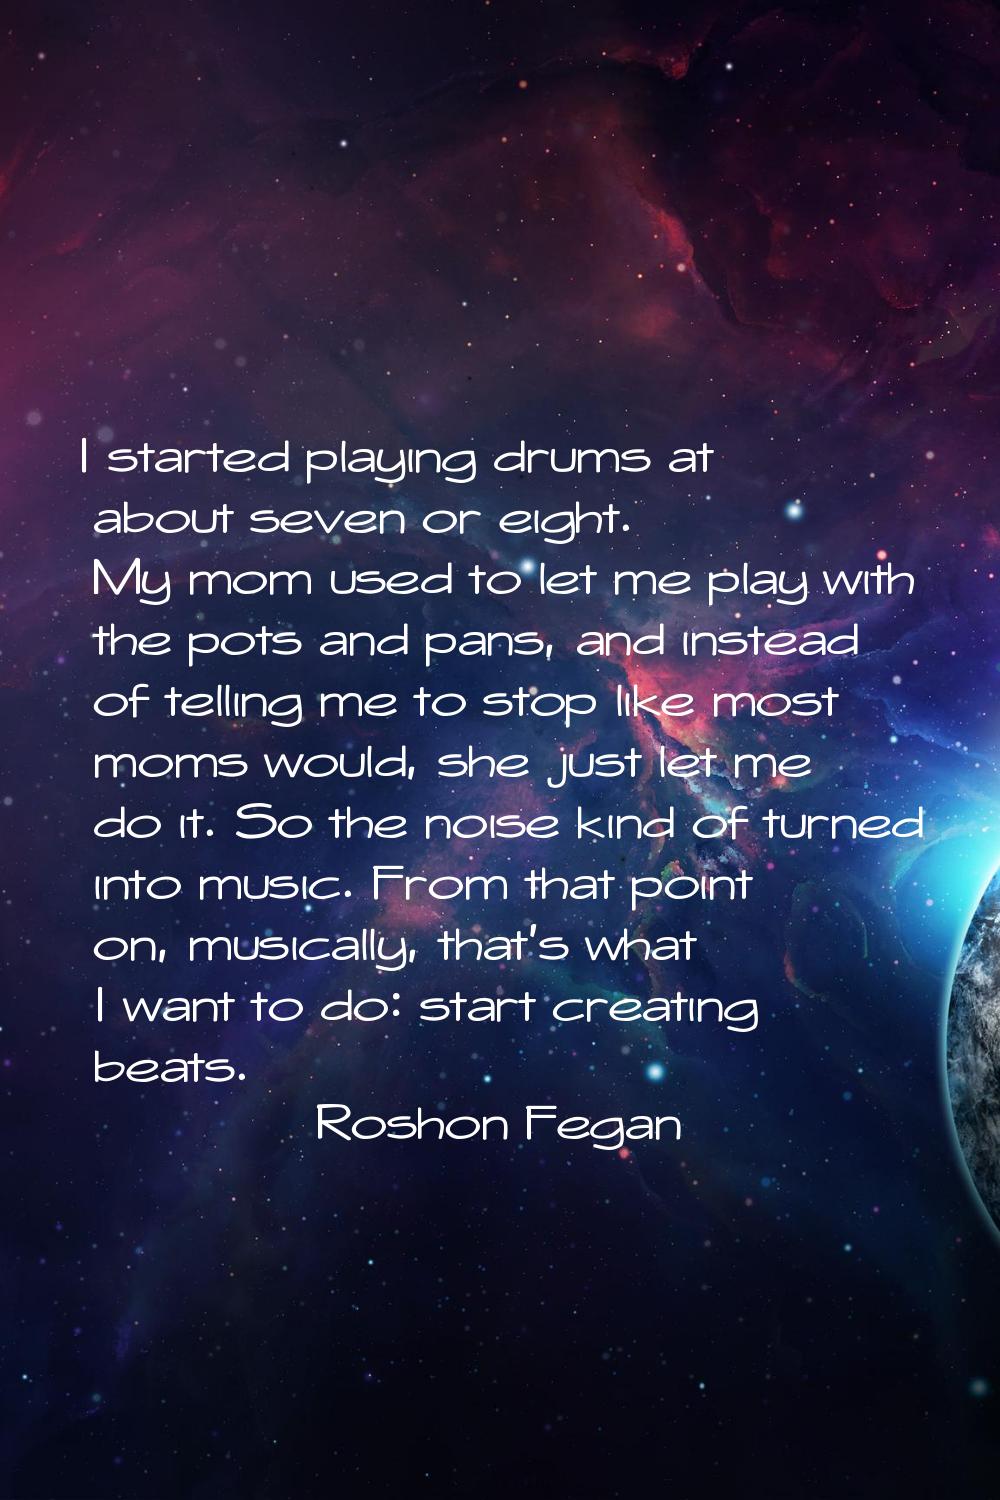 I started playing drums at about seven or eight. My mom used to let me play with the pots and pans,